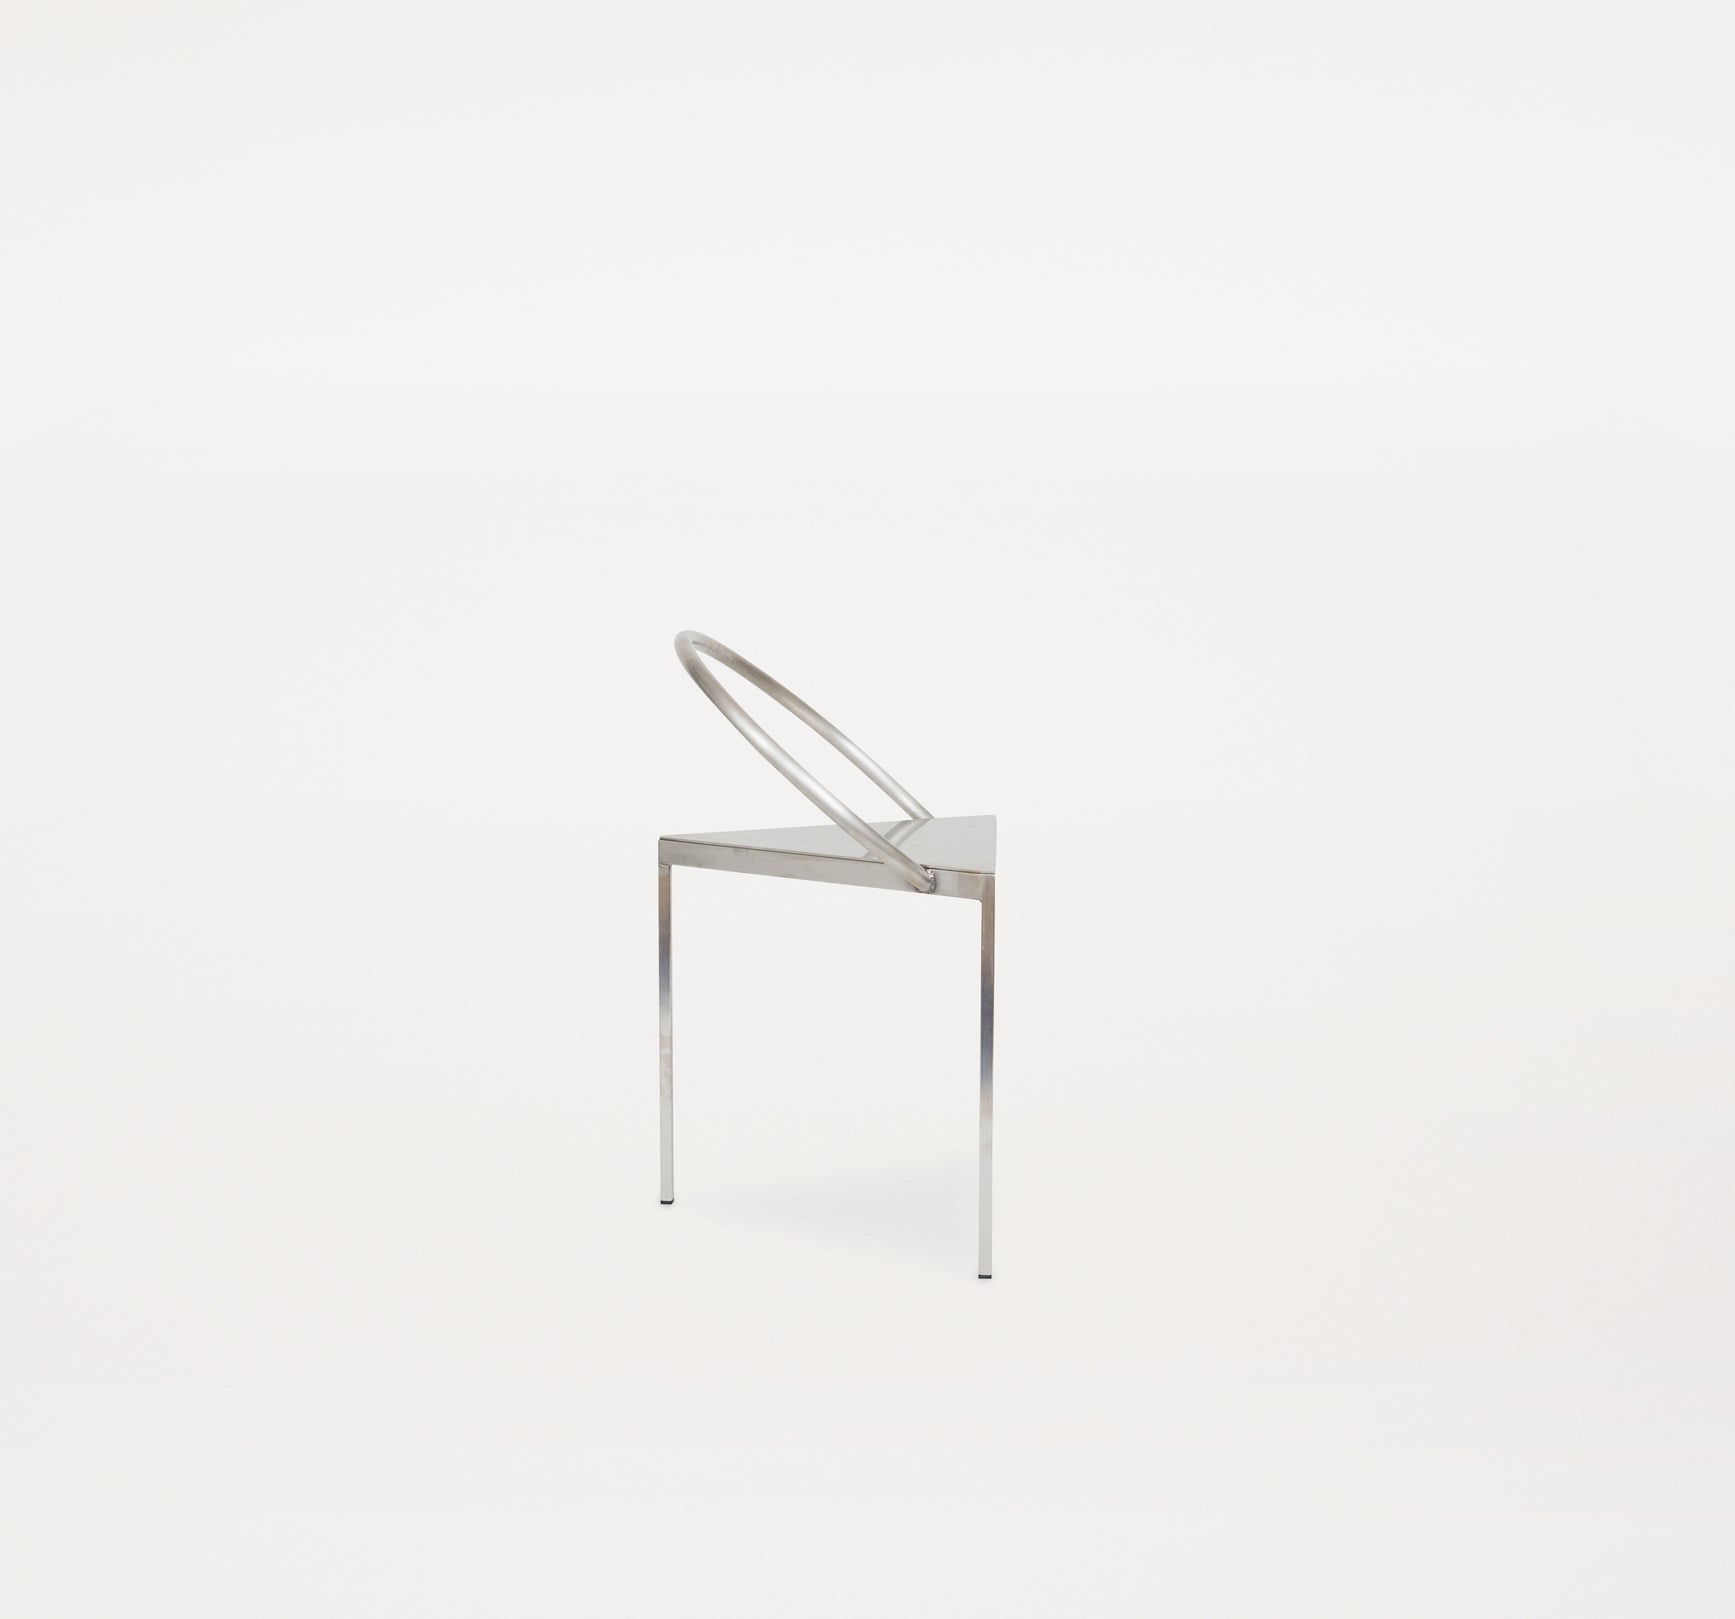 IN-STOCK I Triangolo Chair Steel  by FRAMA